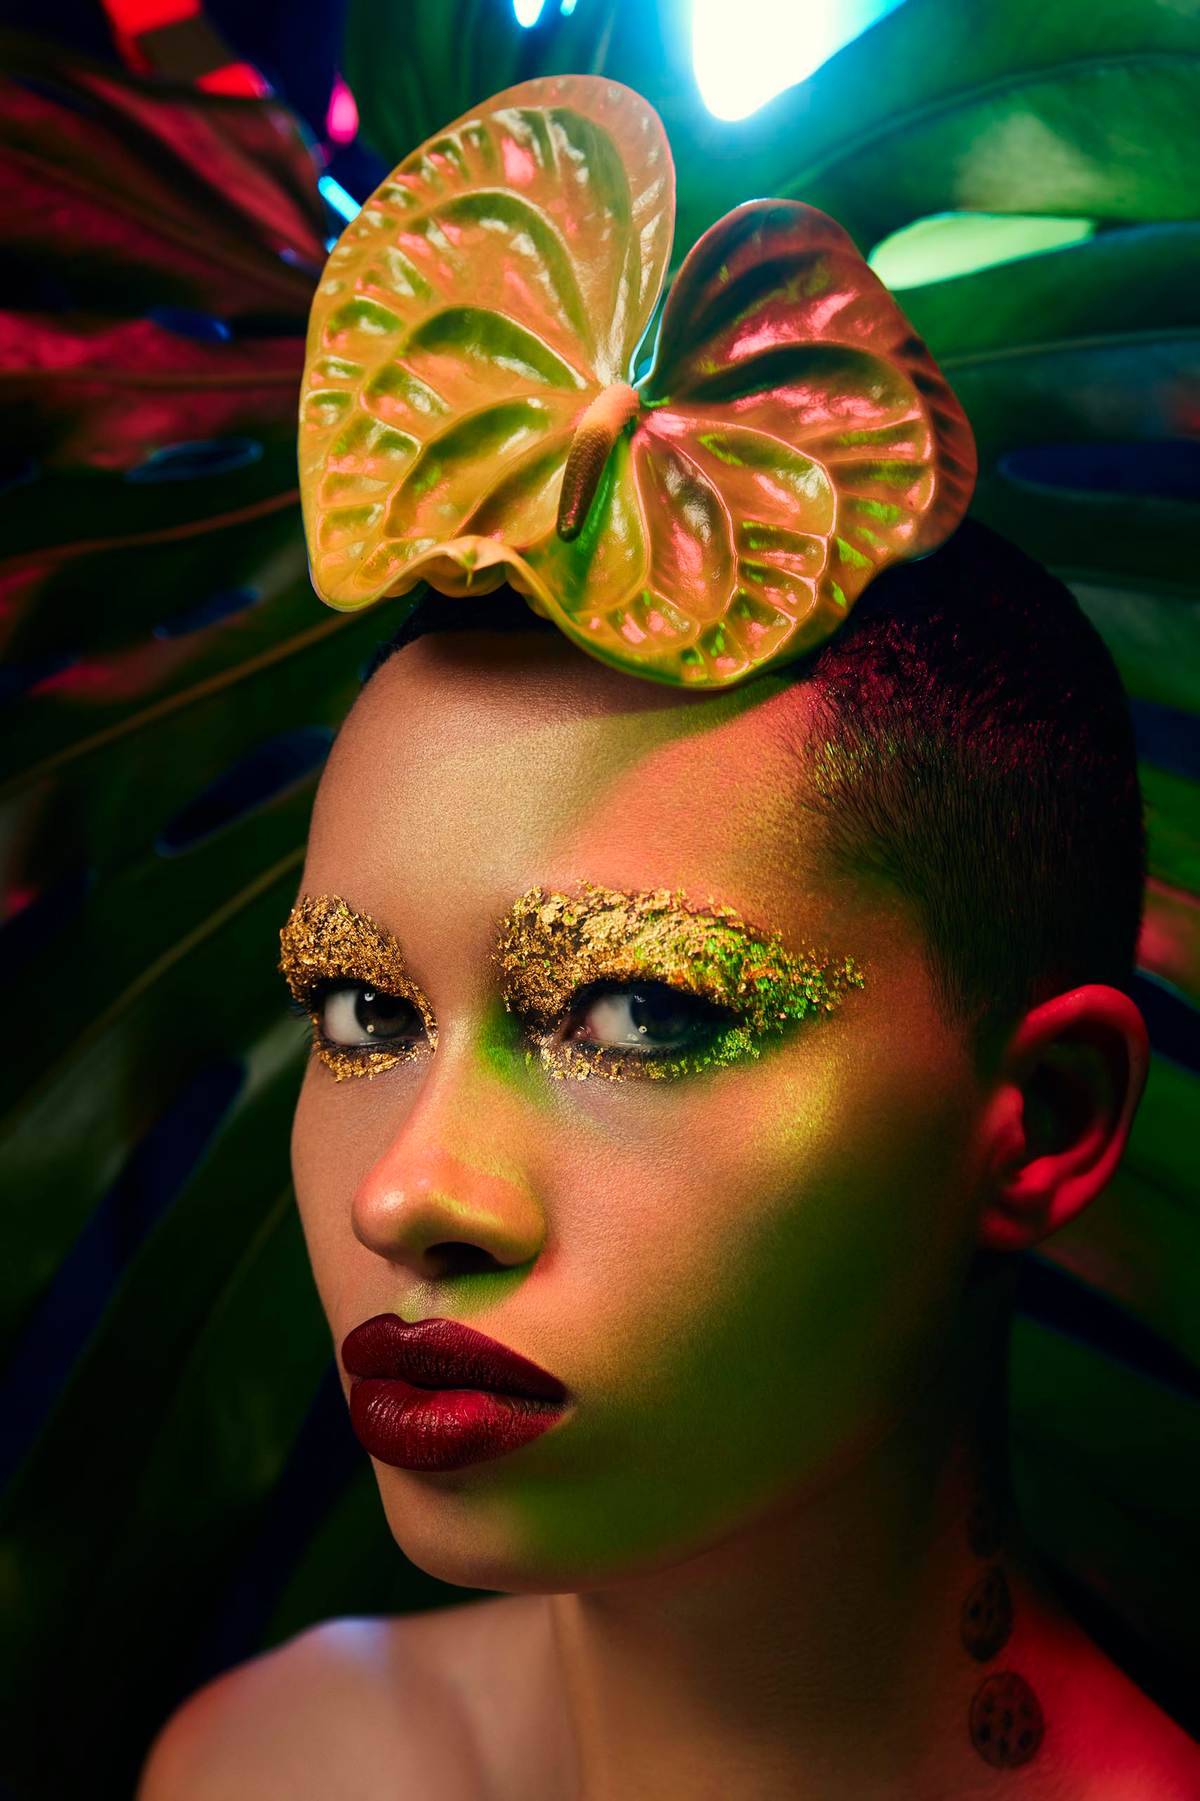 BEAUTY_editorial_tropical_anthuria_flower_gold_lgbtq_summer_dorit_thies_photography_los_angeles__2U9A7396_v1 copy 2.jpg